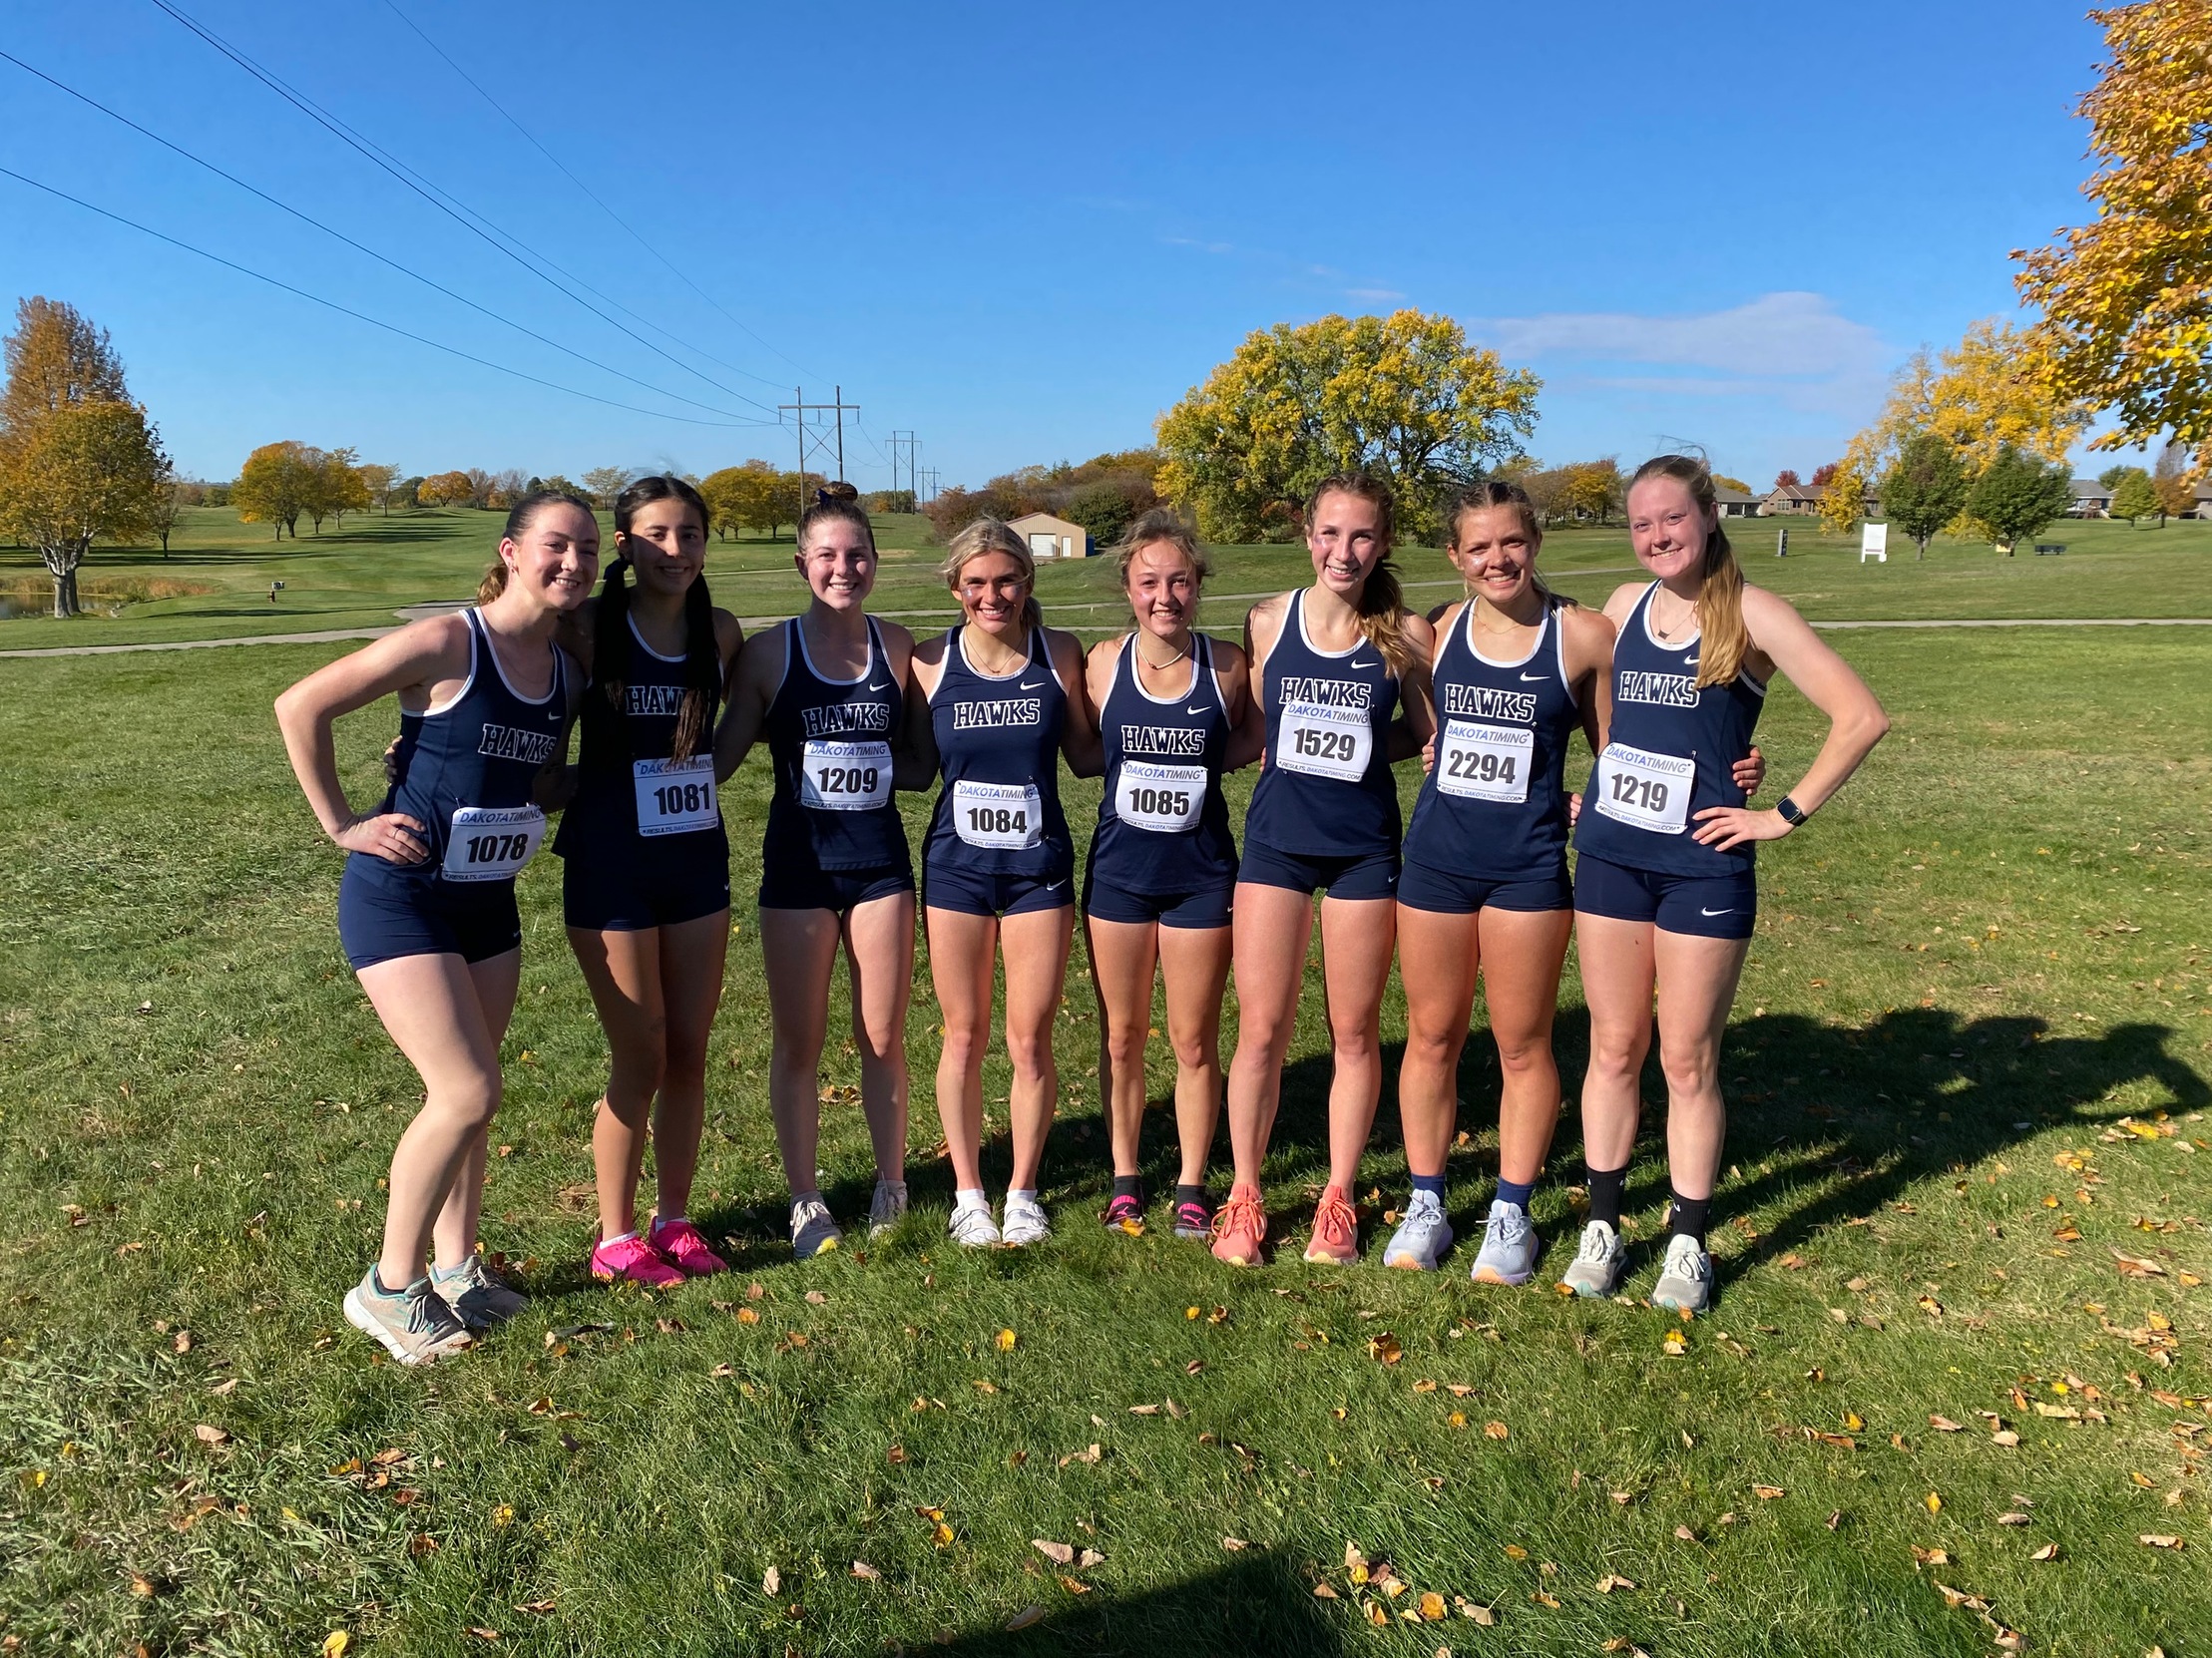 Blue Hawks turn in great performances at Lancer Invitational, women take first